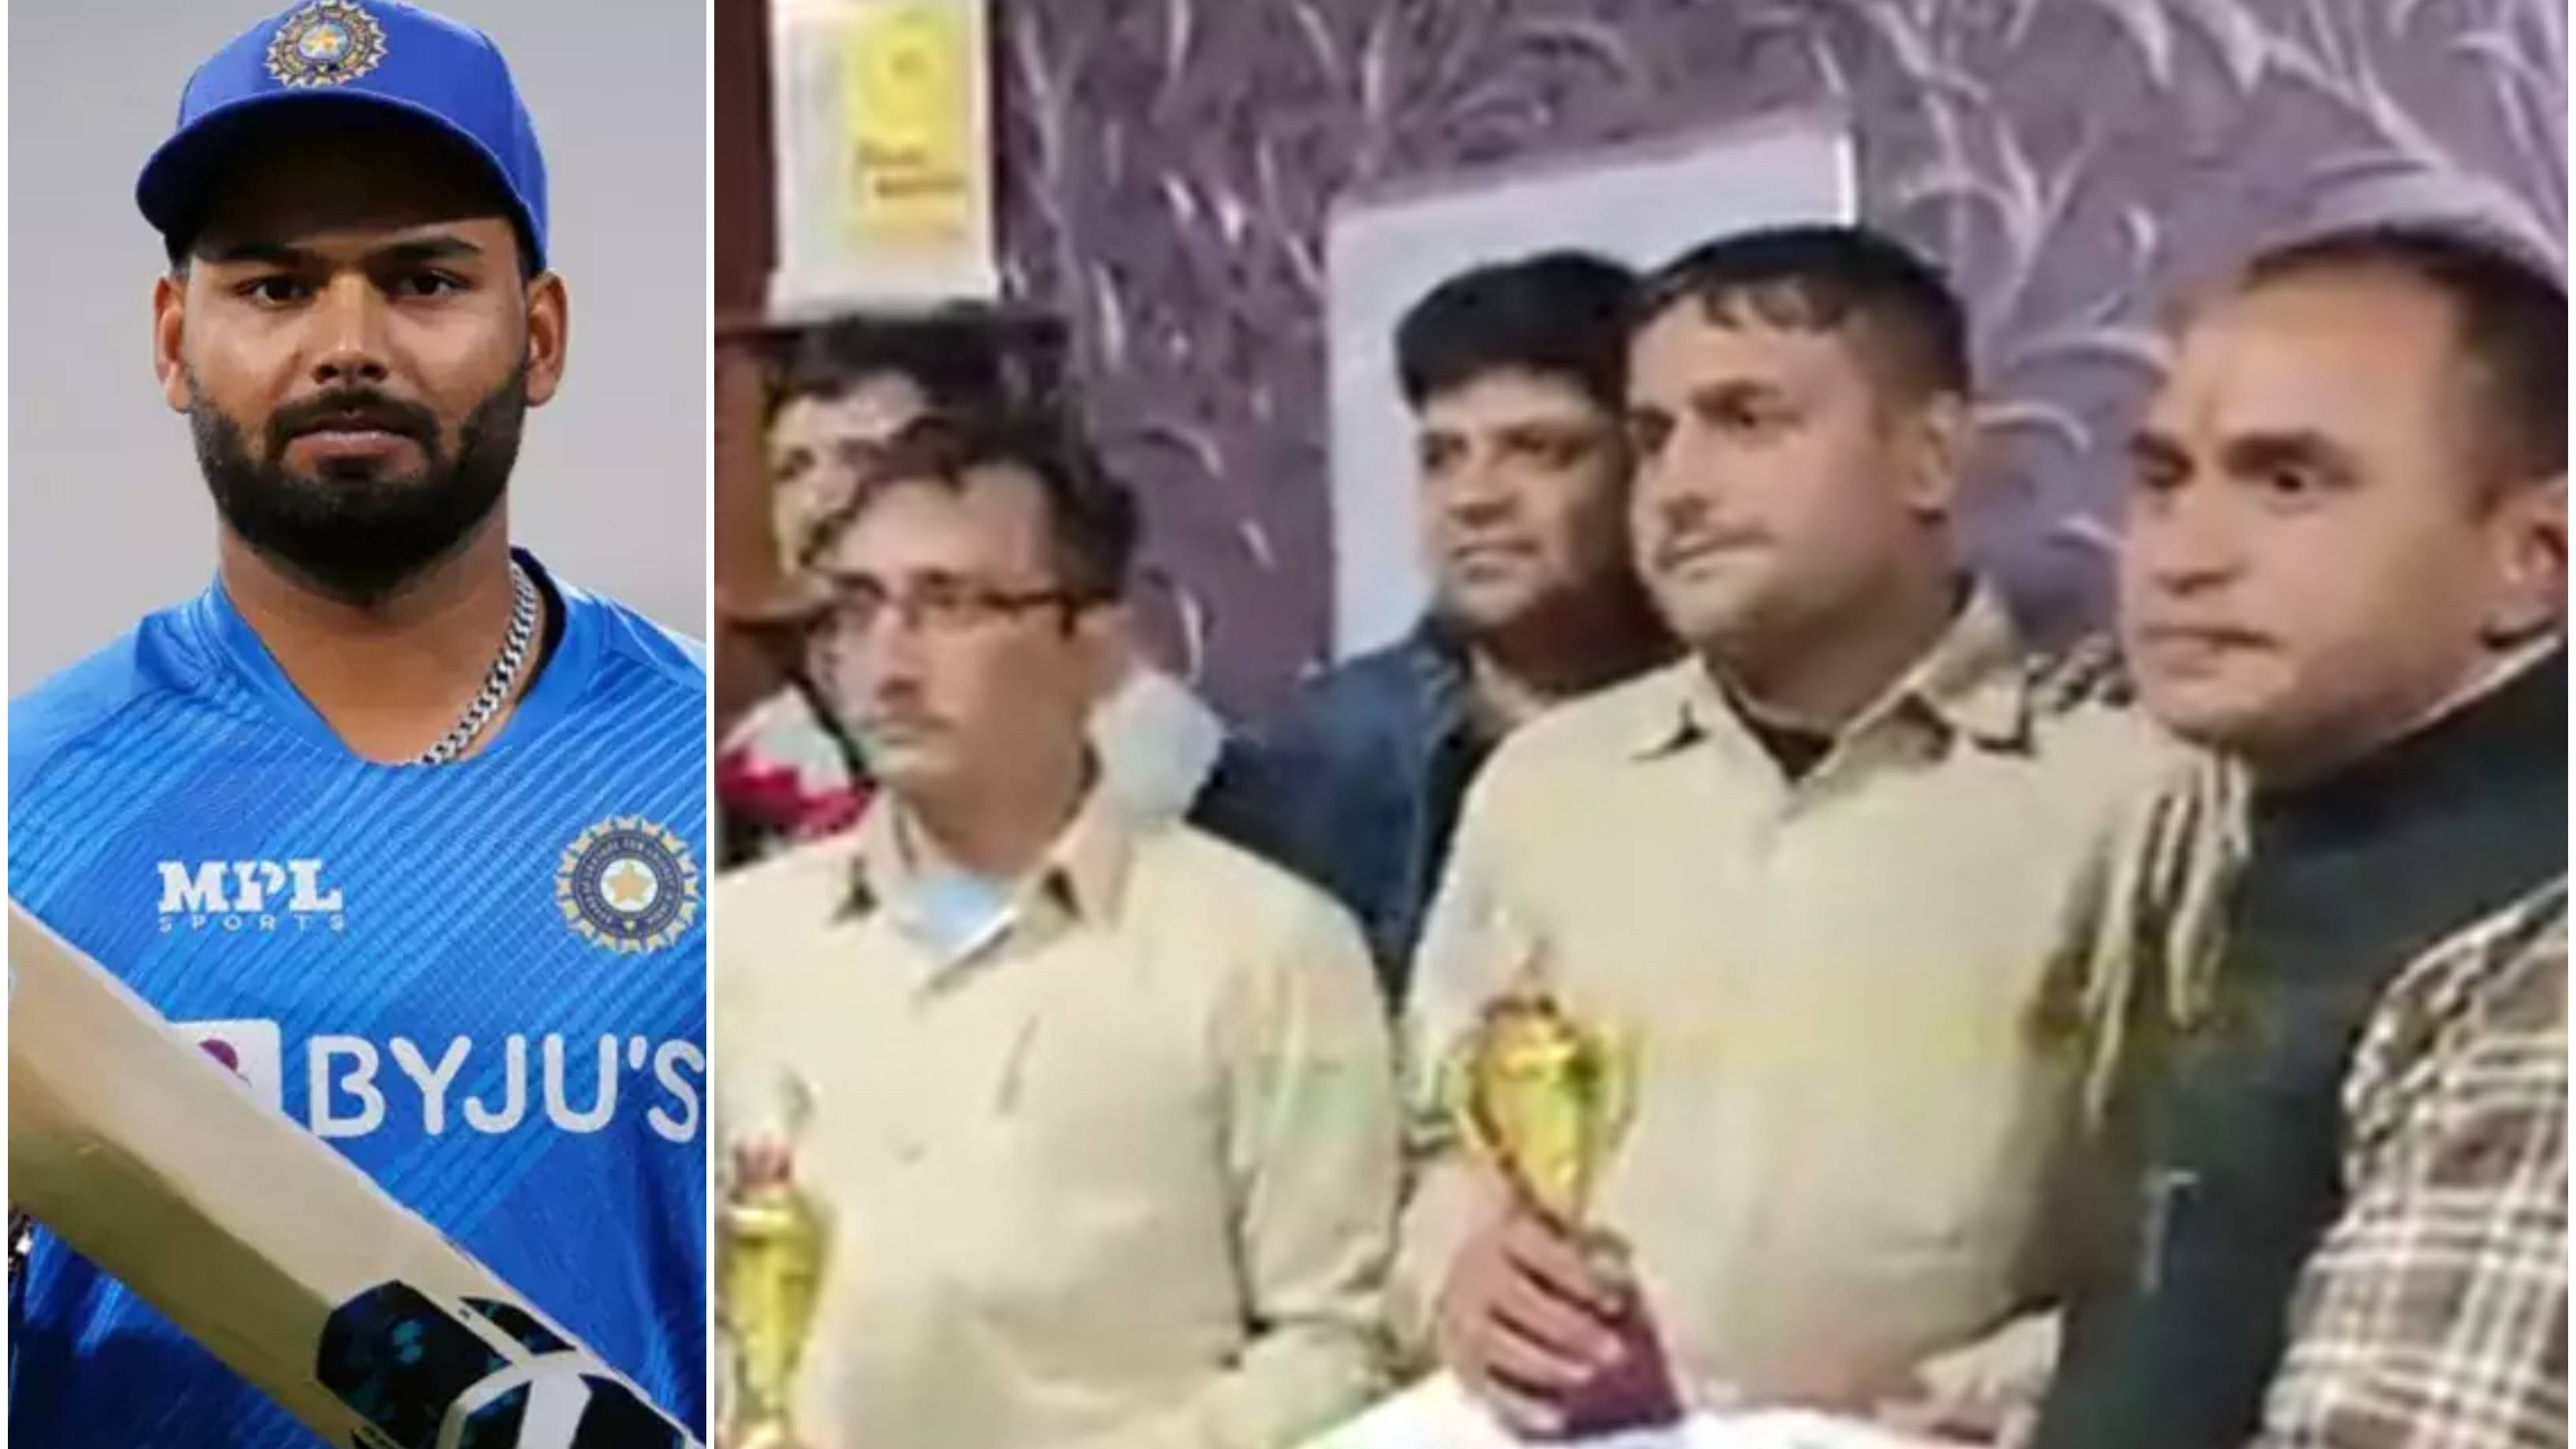 WATCH: Bus driver Sushil Kumar Mann, conductor honoured by Haryana government for rescuing Rishabh Pant